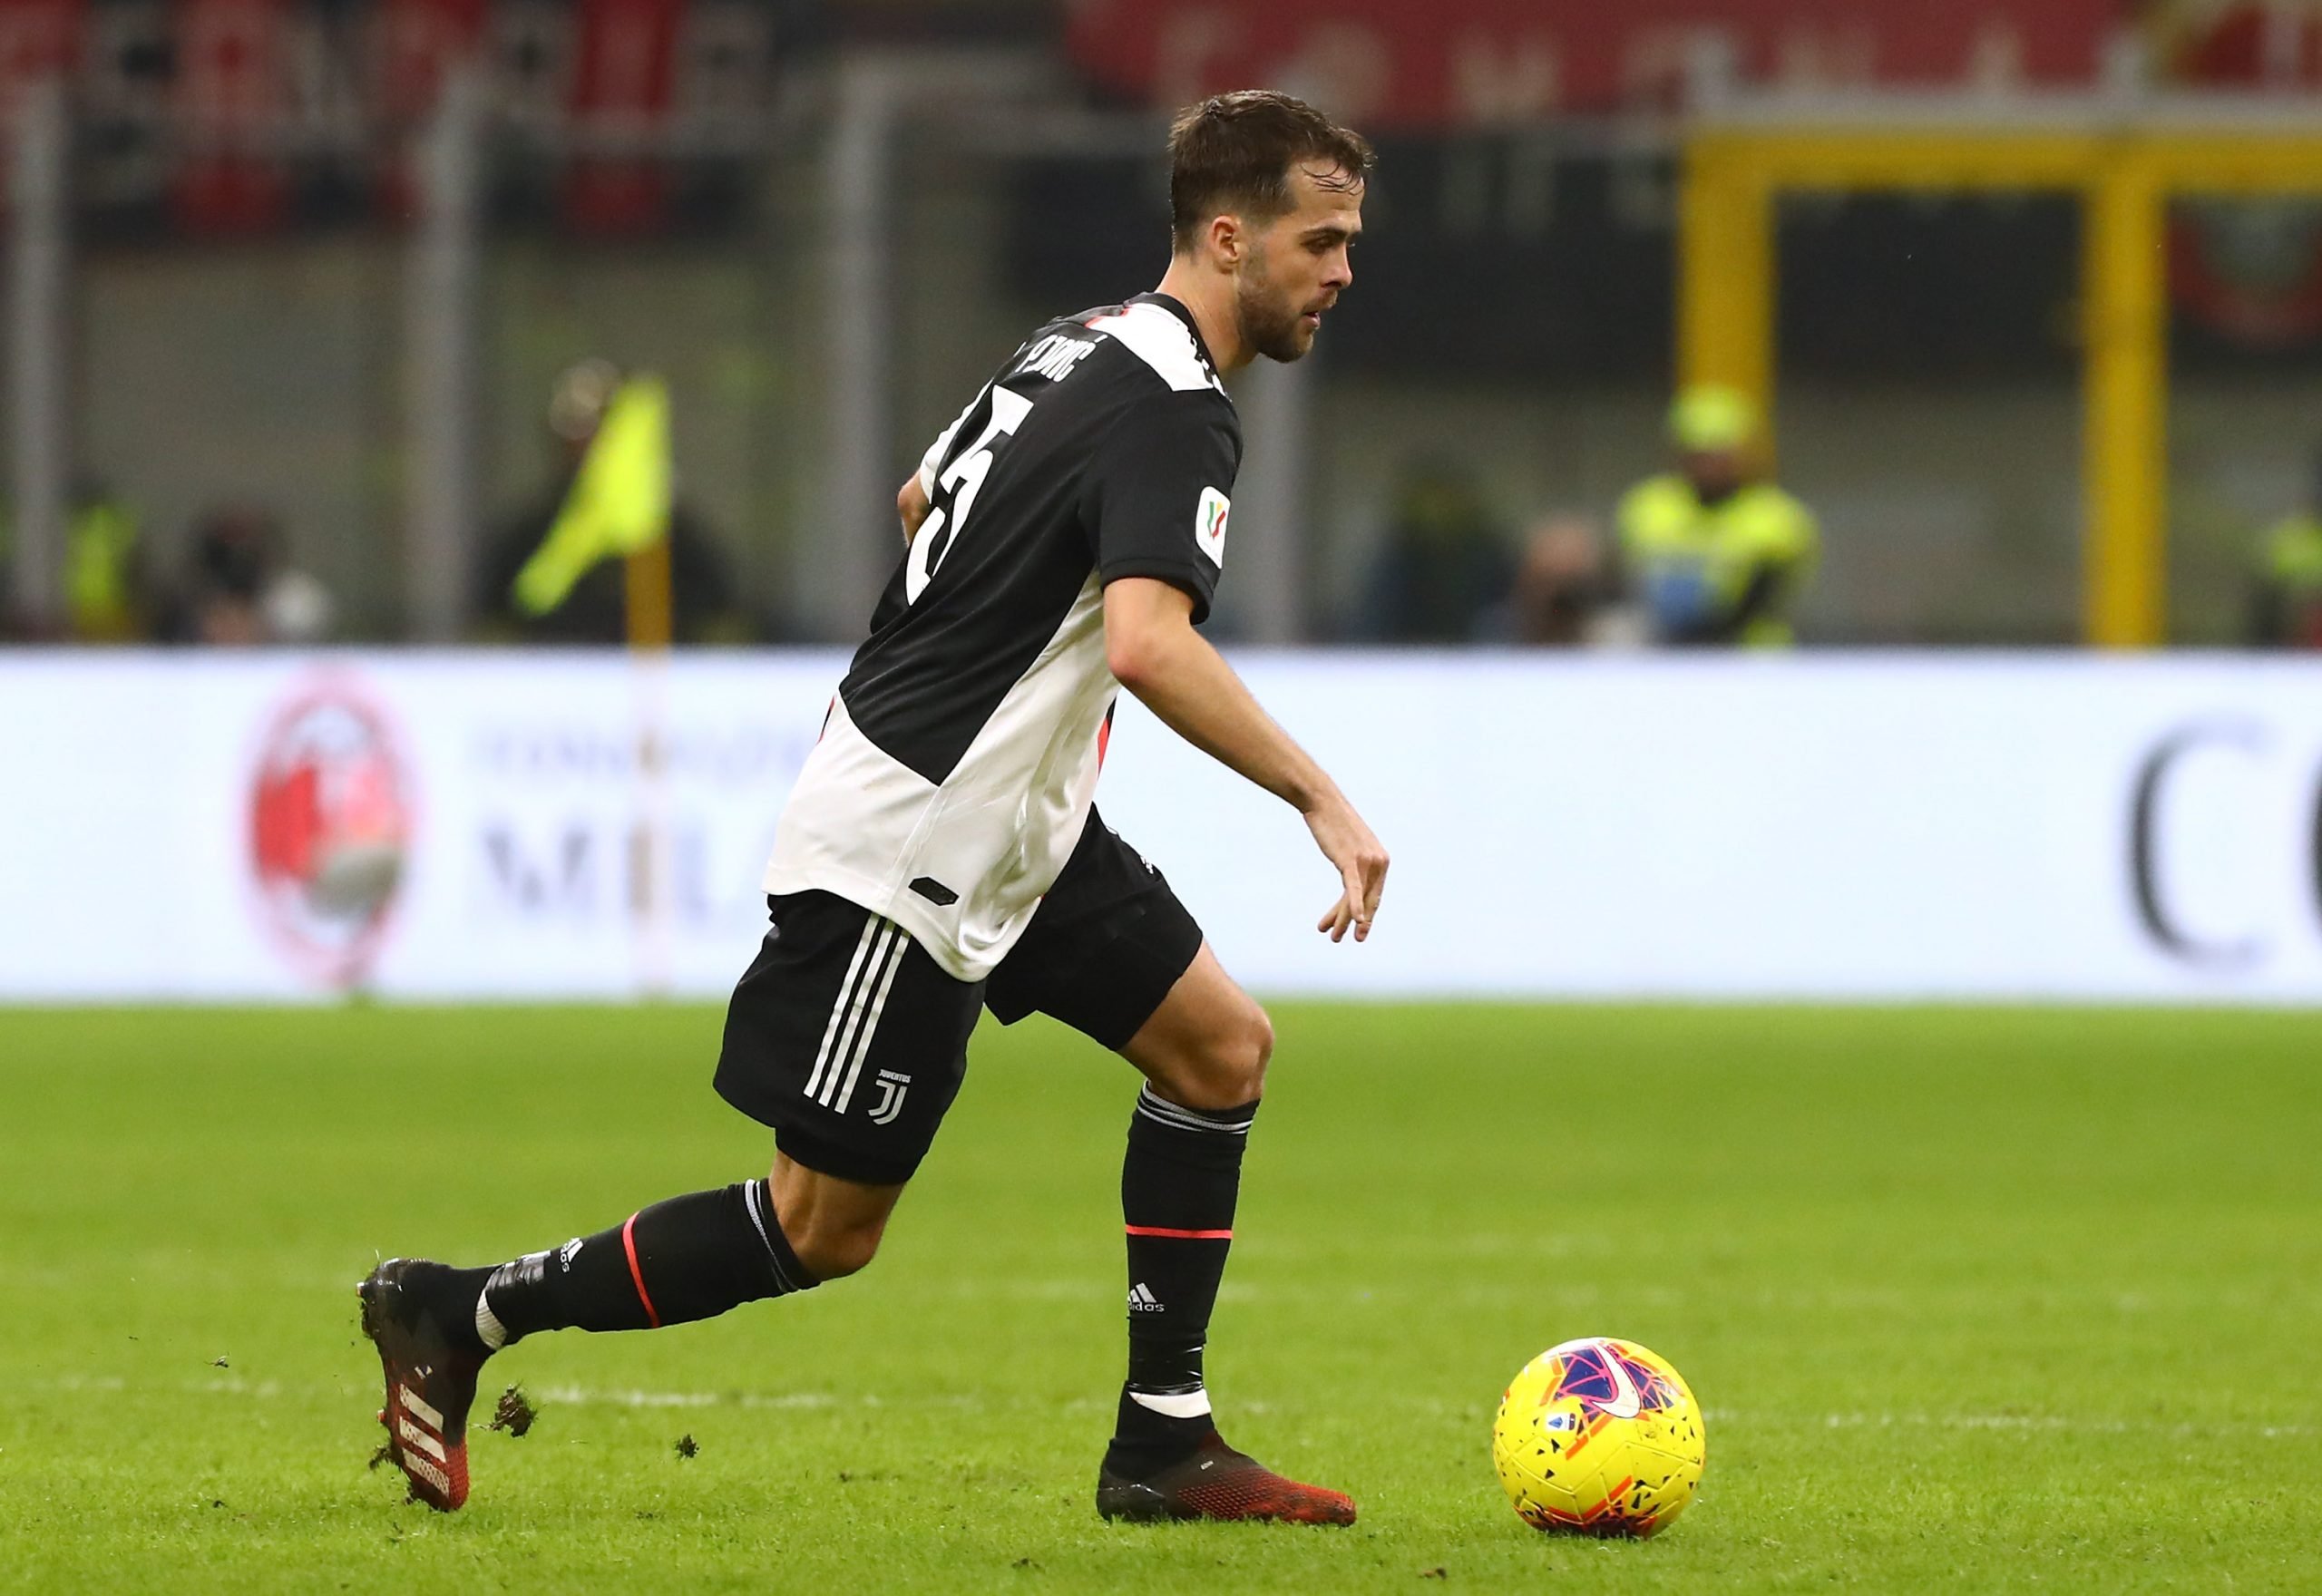 Miralem Pjanic of Juventus in action during the Coppa Italia Semi Final match between AC Milan and Juventus at Stadio Giuseppe Meazza on February 13, 2020 in Milan, Italy.  (Photo by Marco Luzzani/Getty Images)